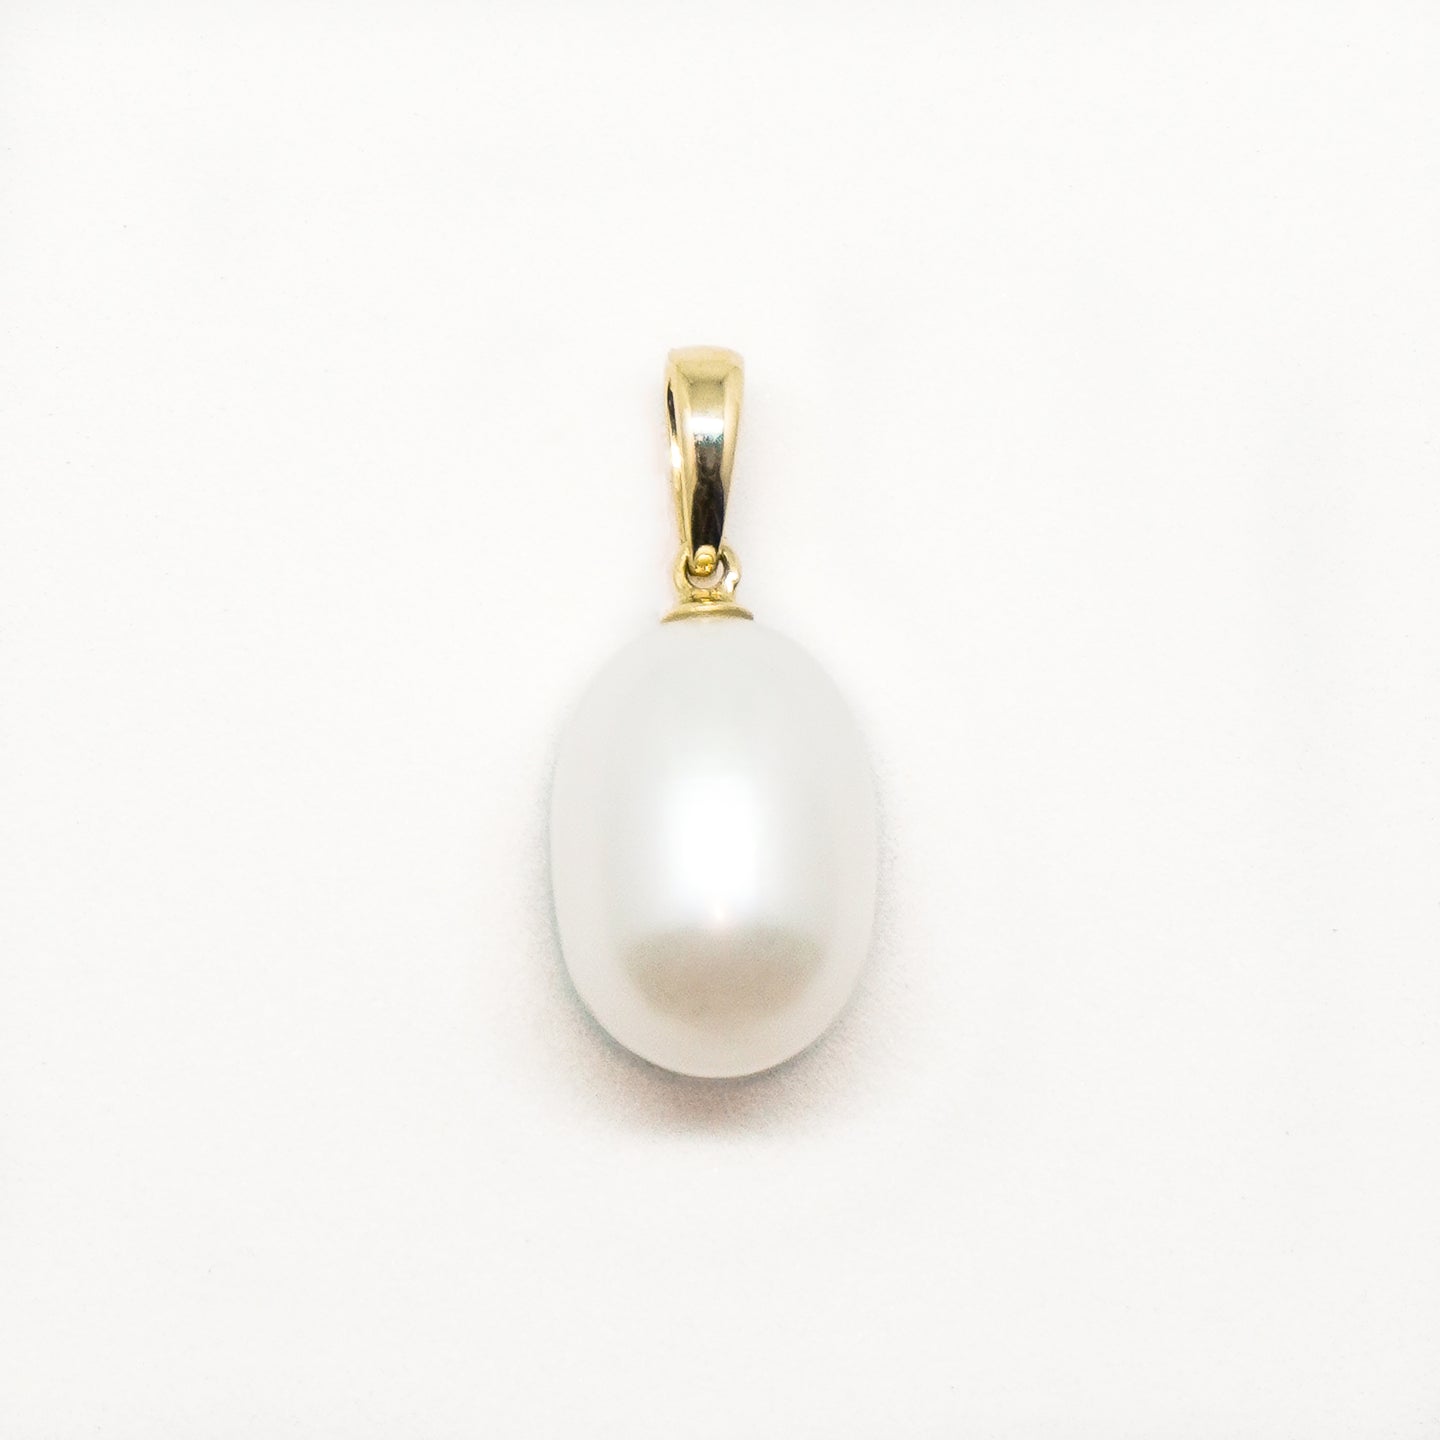 14k Solid Gold Large Freshwater Pearl Pendant 14 mm x 10 mm